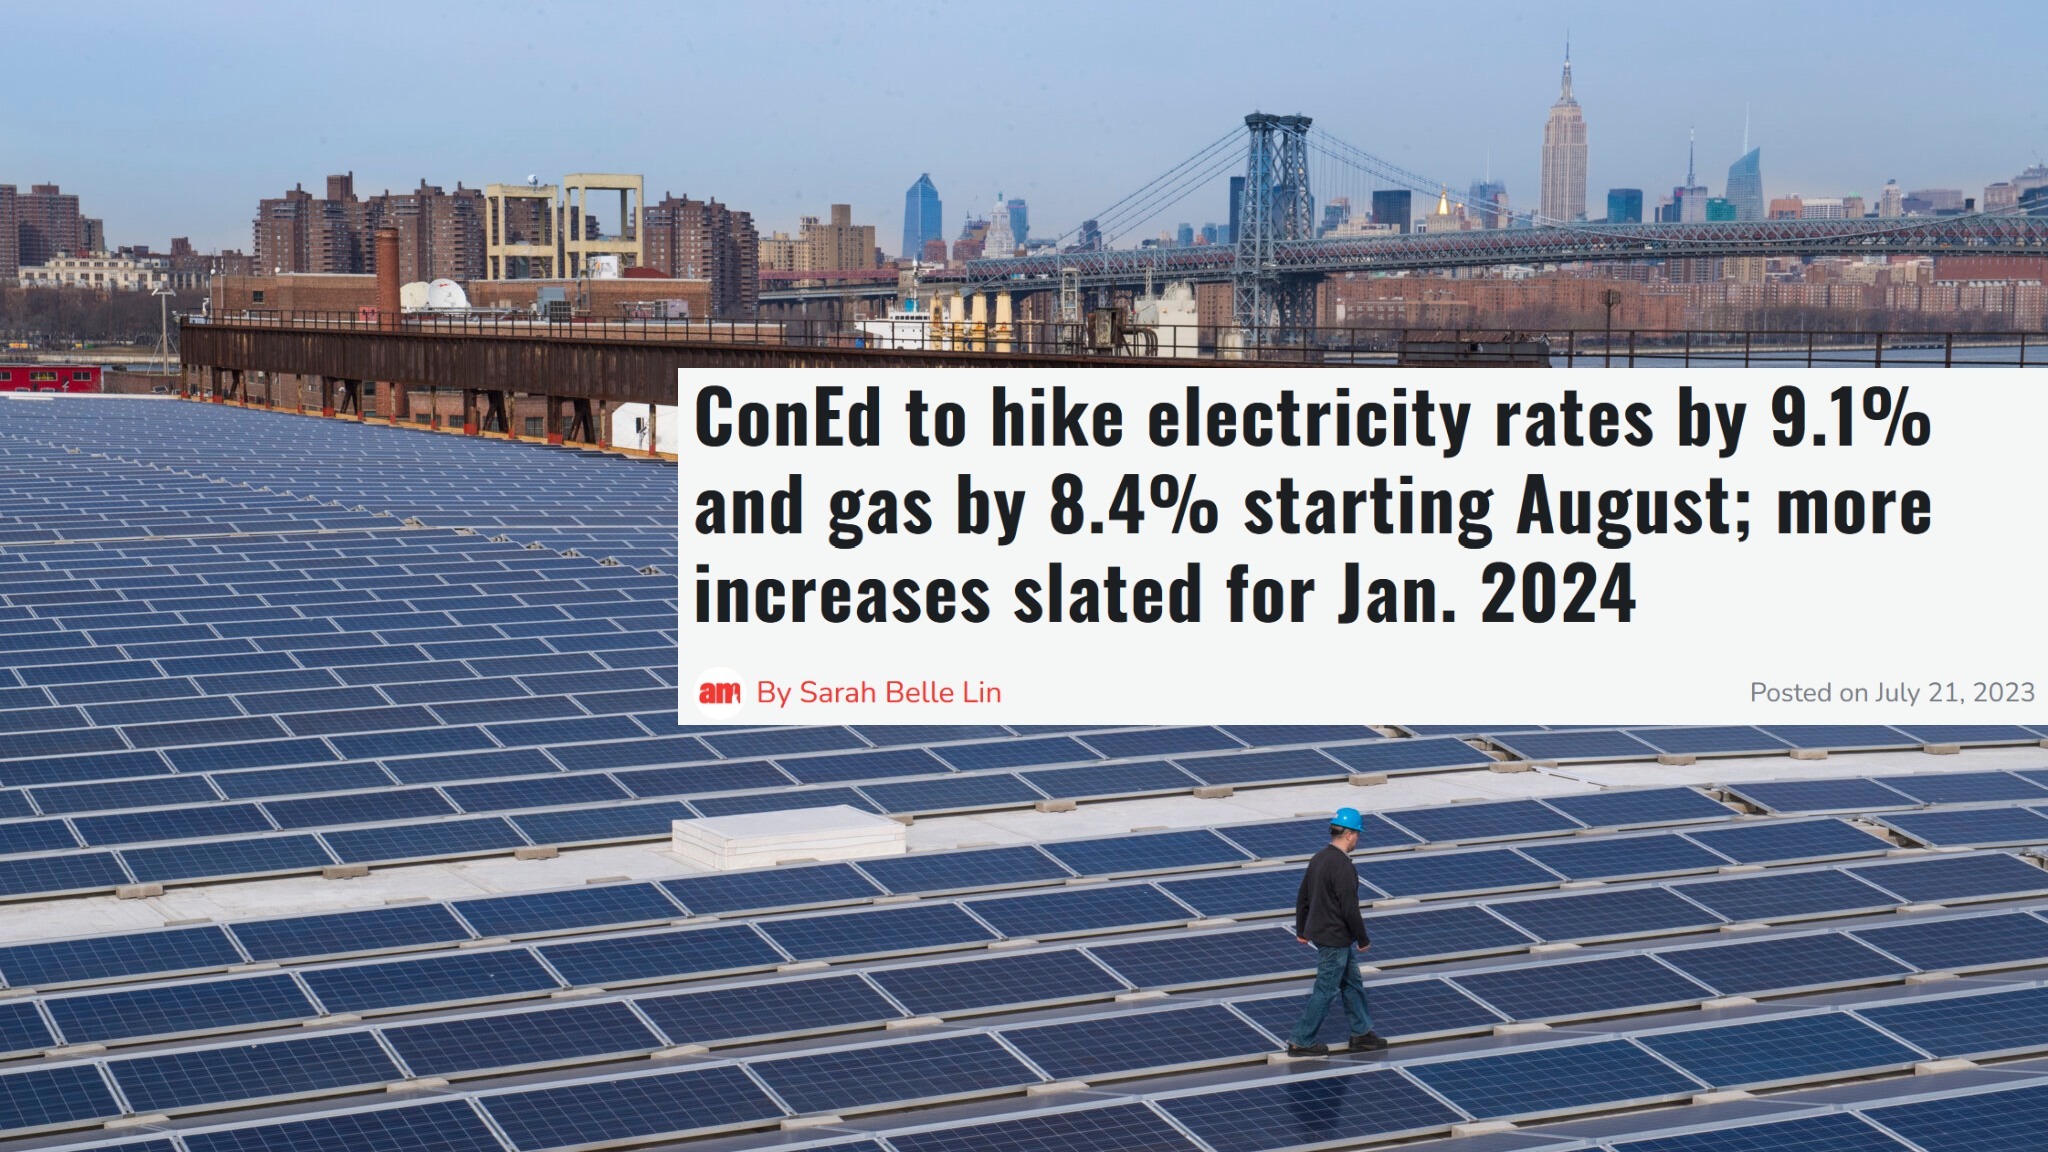 Image of NYC looking over solar panels warning for hiking rates by ConEd in upcoming months